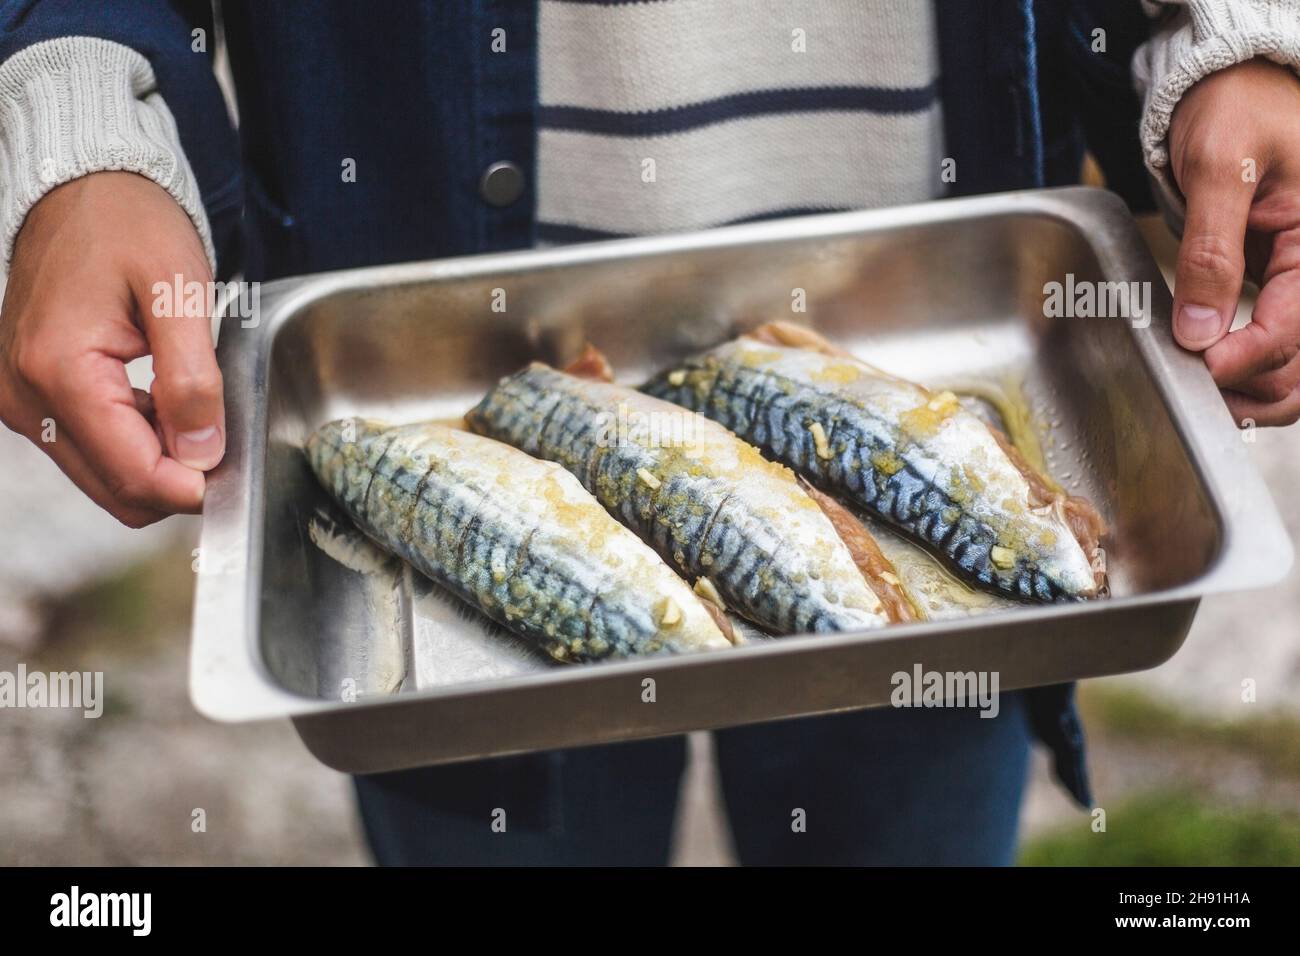 Midsection of man holding fish tray Stock Photo